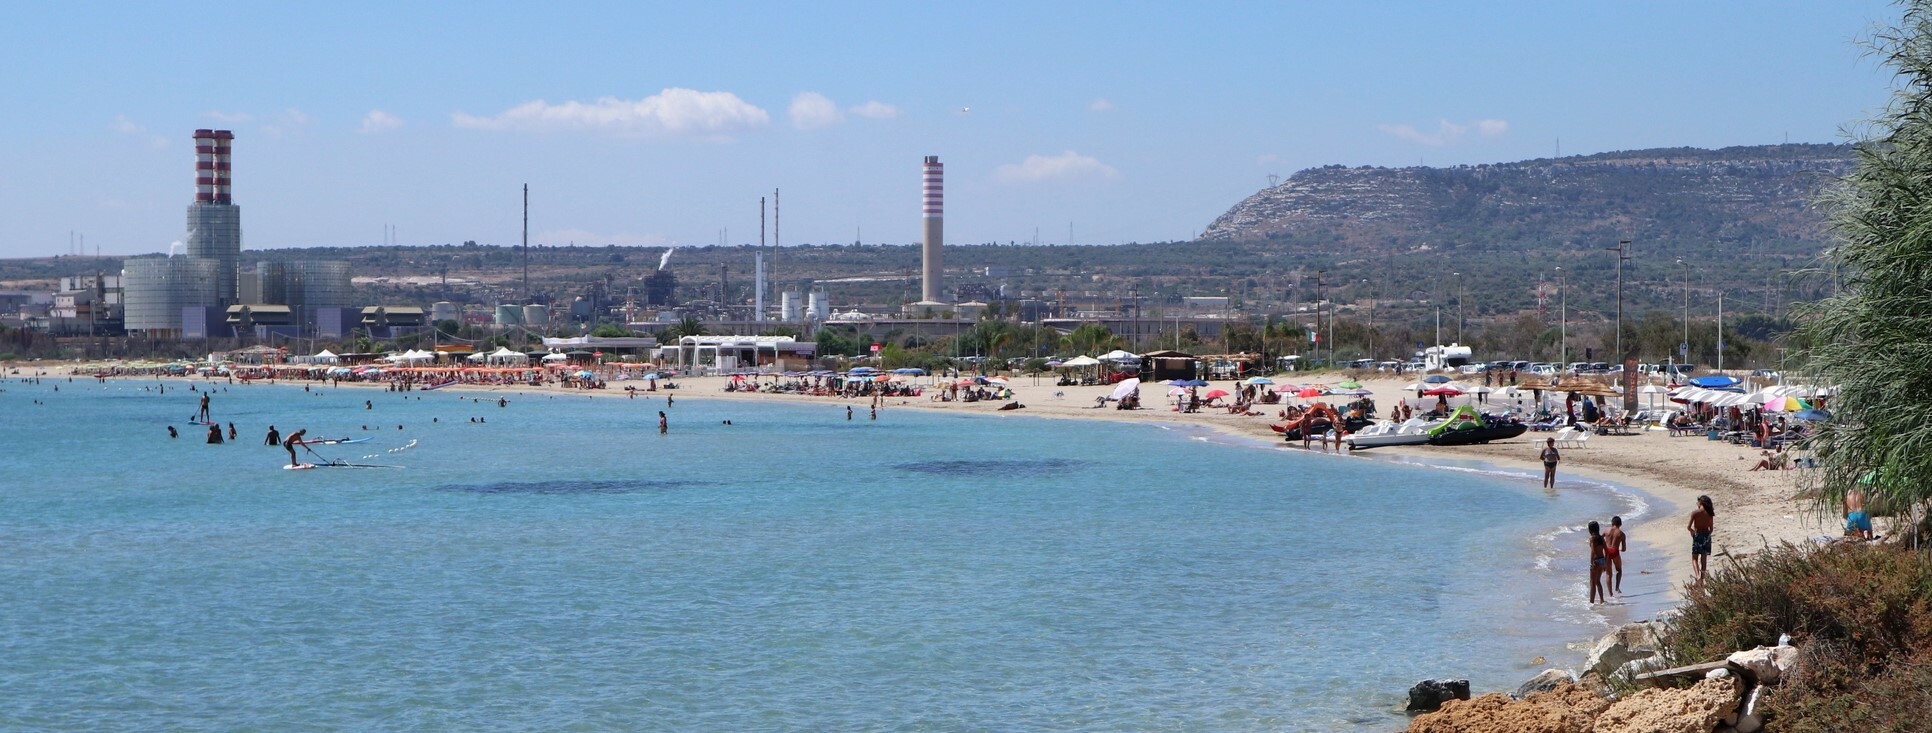 Petrochemical plant in the area of Siracusa, Sicily, Italy